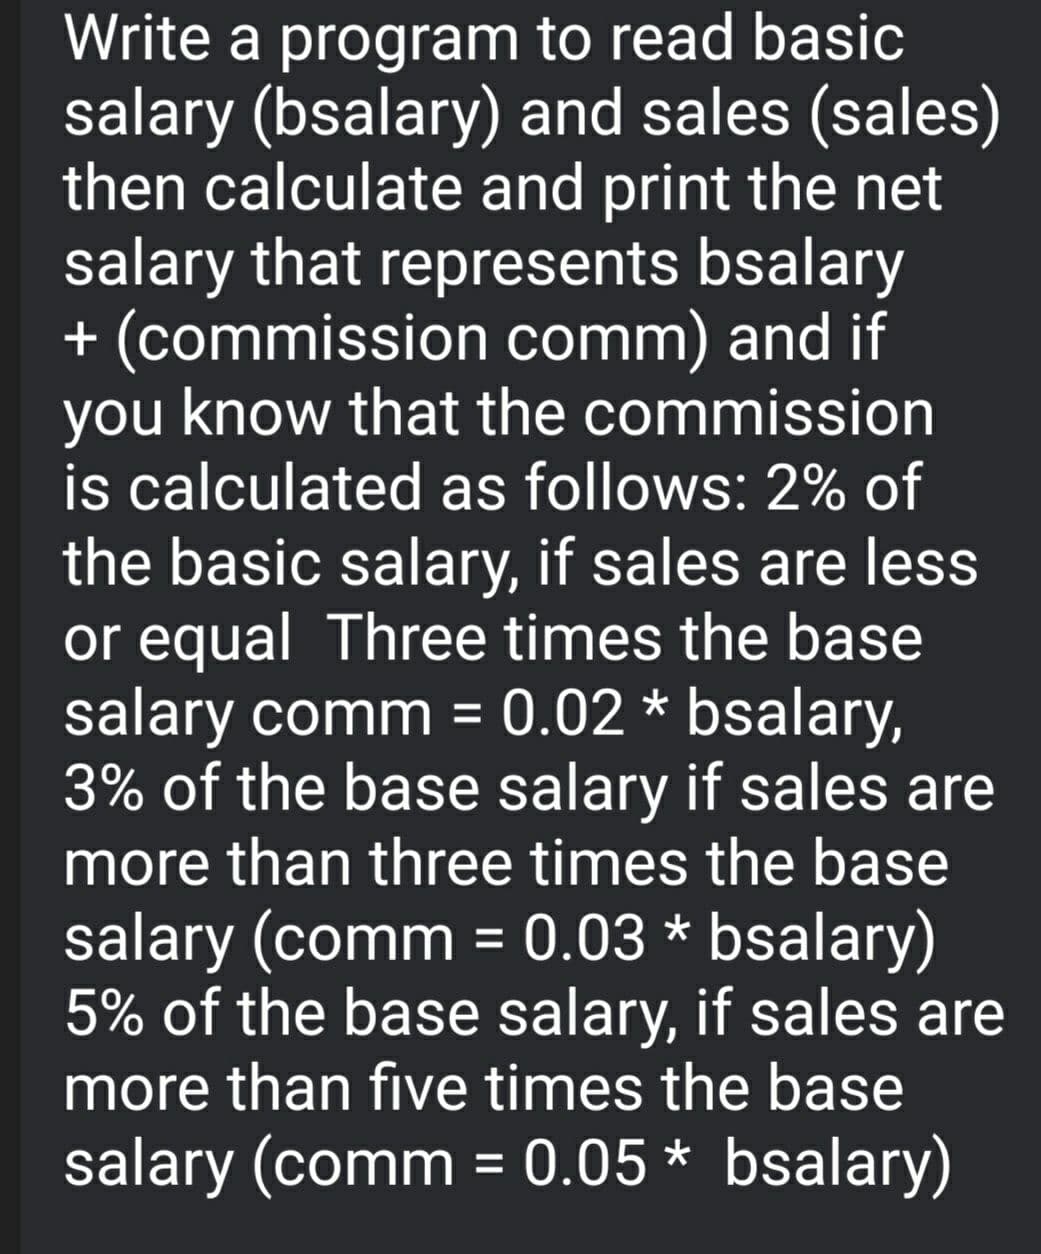 Write a program to read basic
salary (bsalary) and sales (sales)
then calculate and print the net
salary that represents bsalary
+ (commission comm) and if
you know that the commission
is calculated as follows: 2% of
the basic salary, if sales are less
or equal Three times the base
salary comm = 0.02 * bsalary,
3% of the base salary if sales are
more than three times the base
%3D
salary (comm = 0.03 * bsalary)
5% of the base salary, if sales are
more than five times the base
salary (comm = 0.05 * bsalary)
%3D
